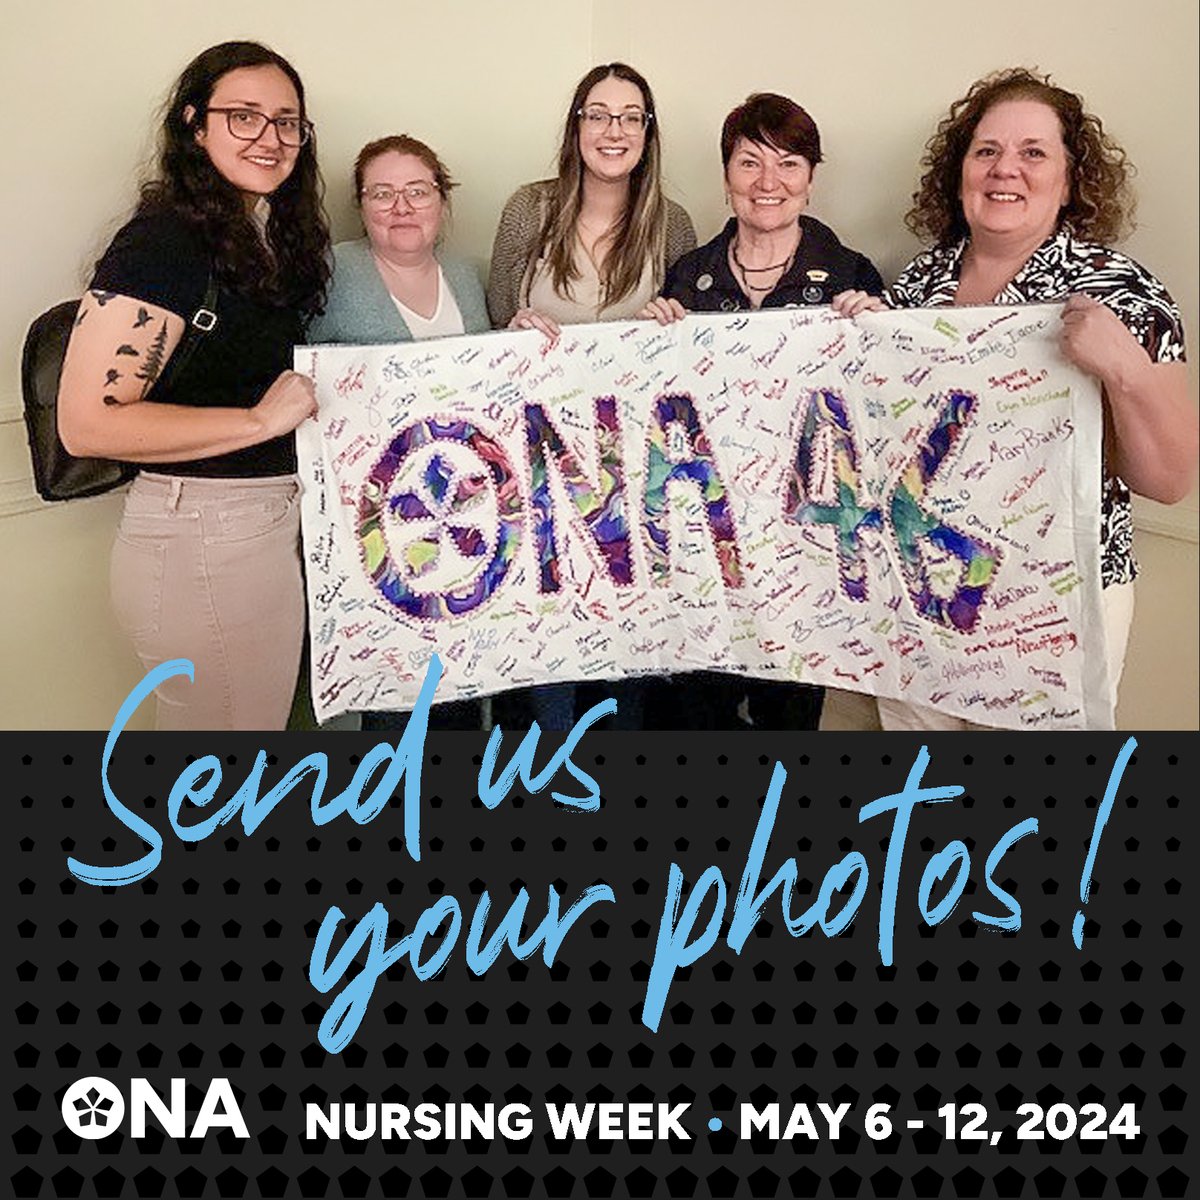 We'd love to see how you and your colleagues are celebrating #NursingWeek, so keep those photos coming! Here's how ONA46 is celebrating this week. Please send your photos to digital@ona.org with the subject 'Nursing Week Photos'!